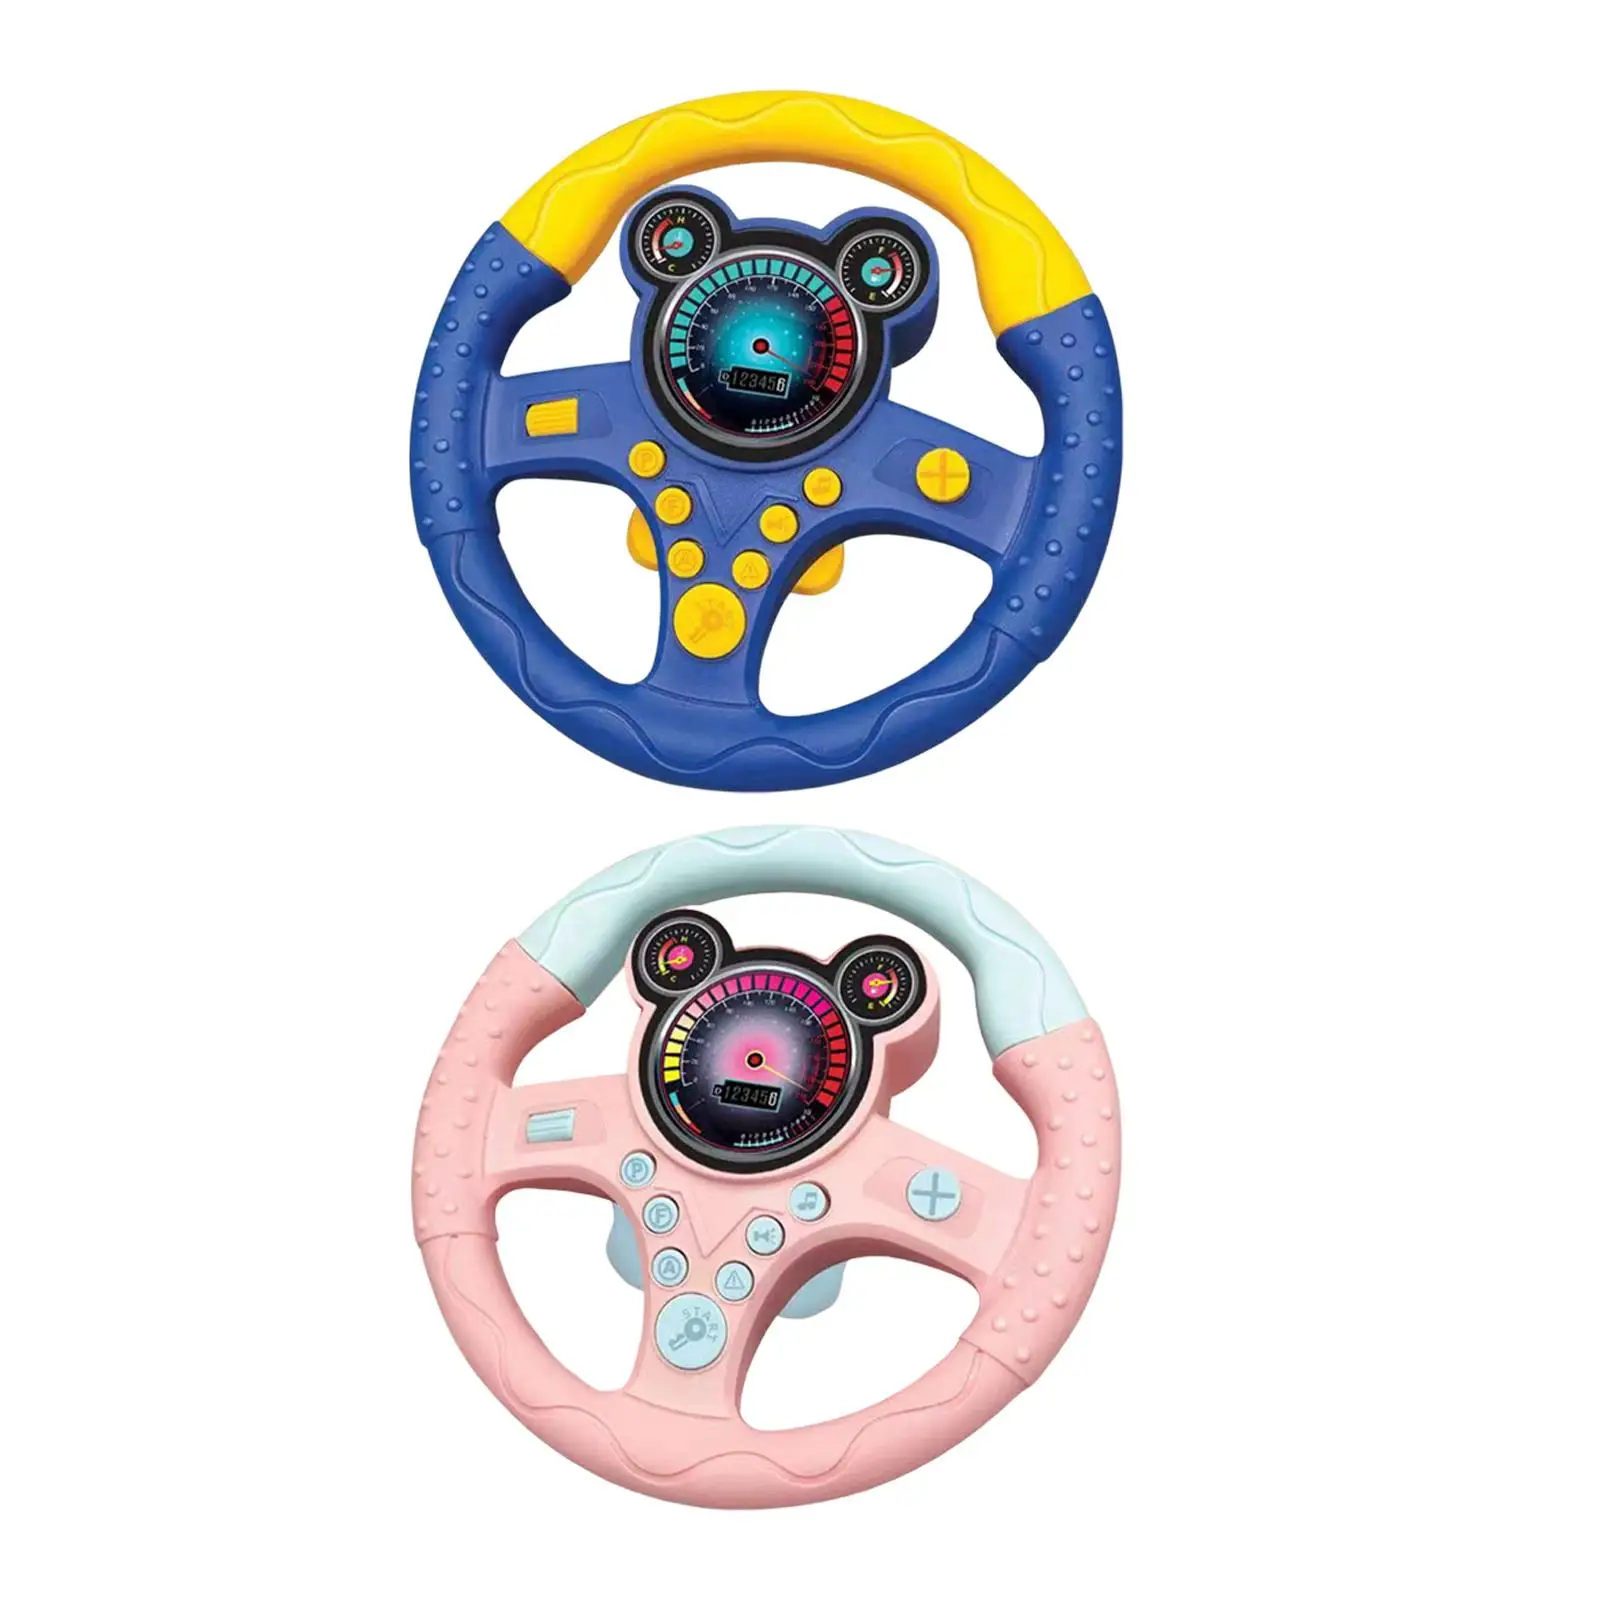 Simulated Steering Wheel Pretend Play Driving Toy Busy Board DIY Accessory for Treehouse Busy Board Backyard Birthday Gifts